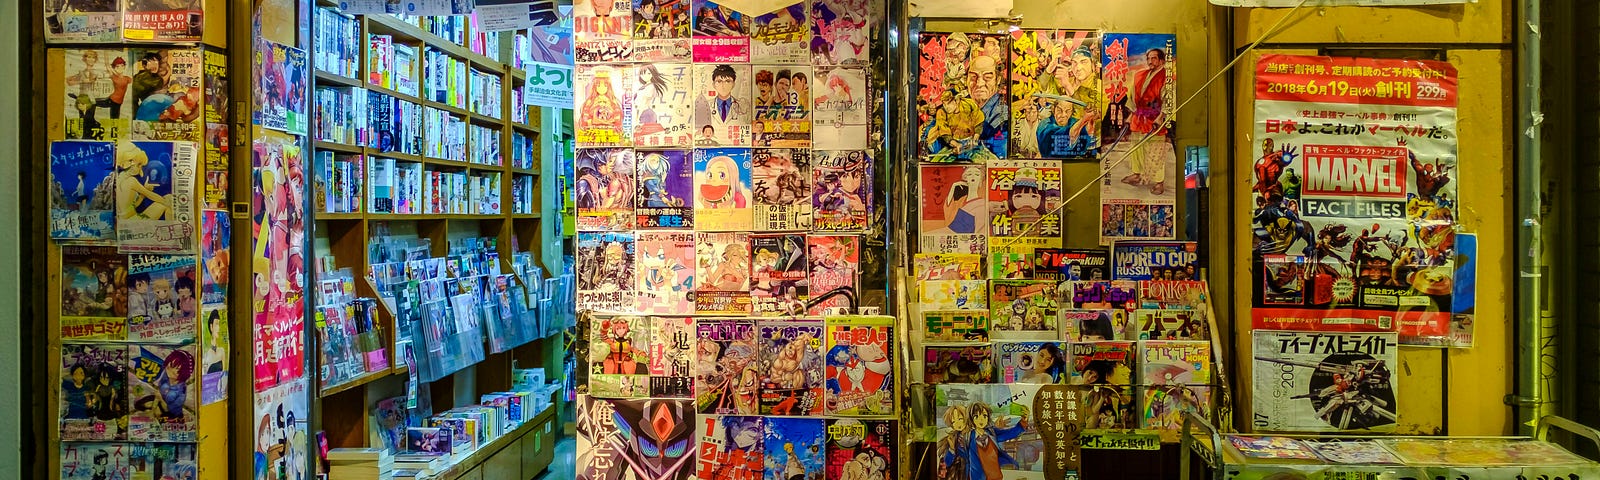 A manga and comic book store in Tokyo